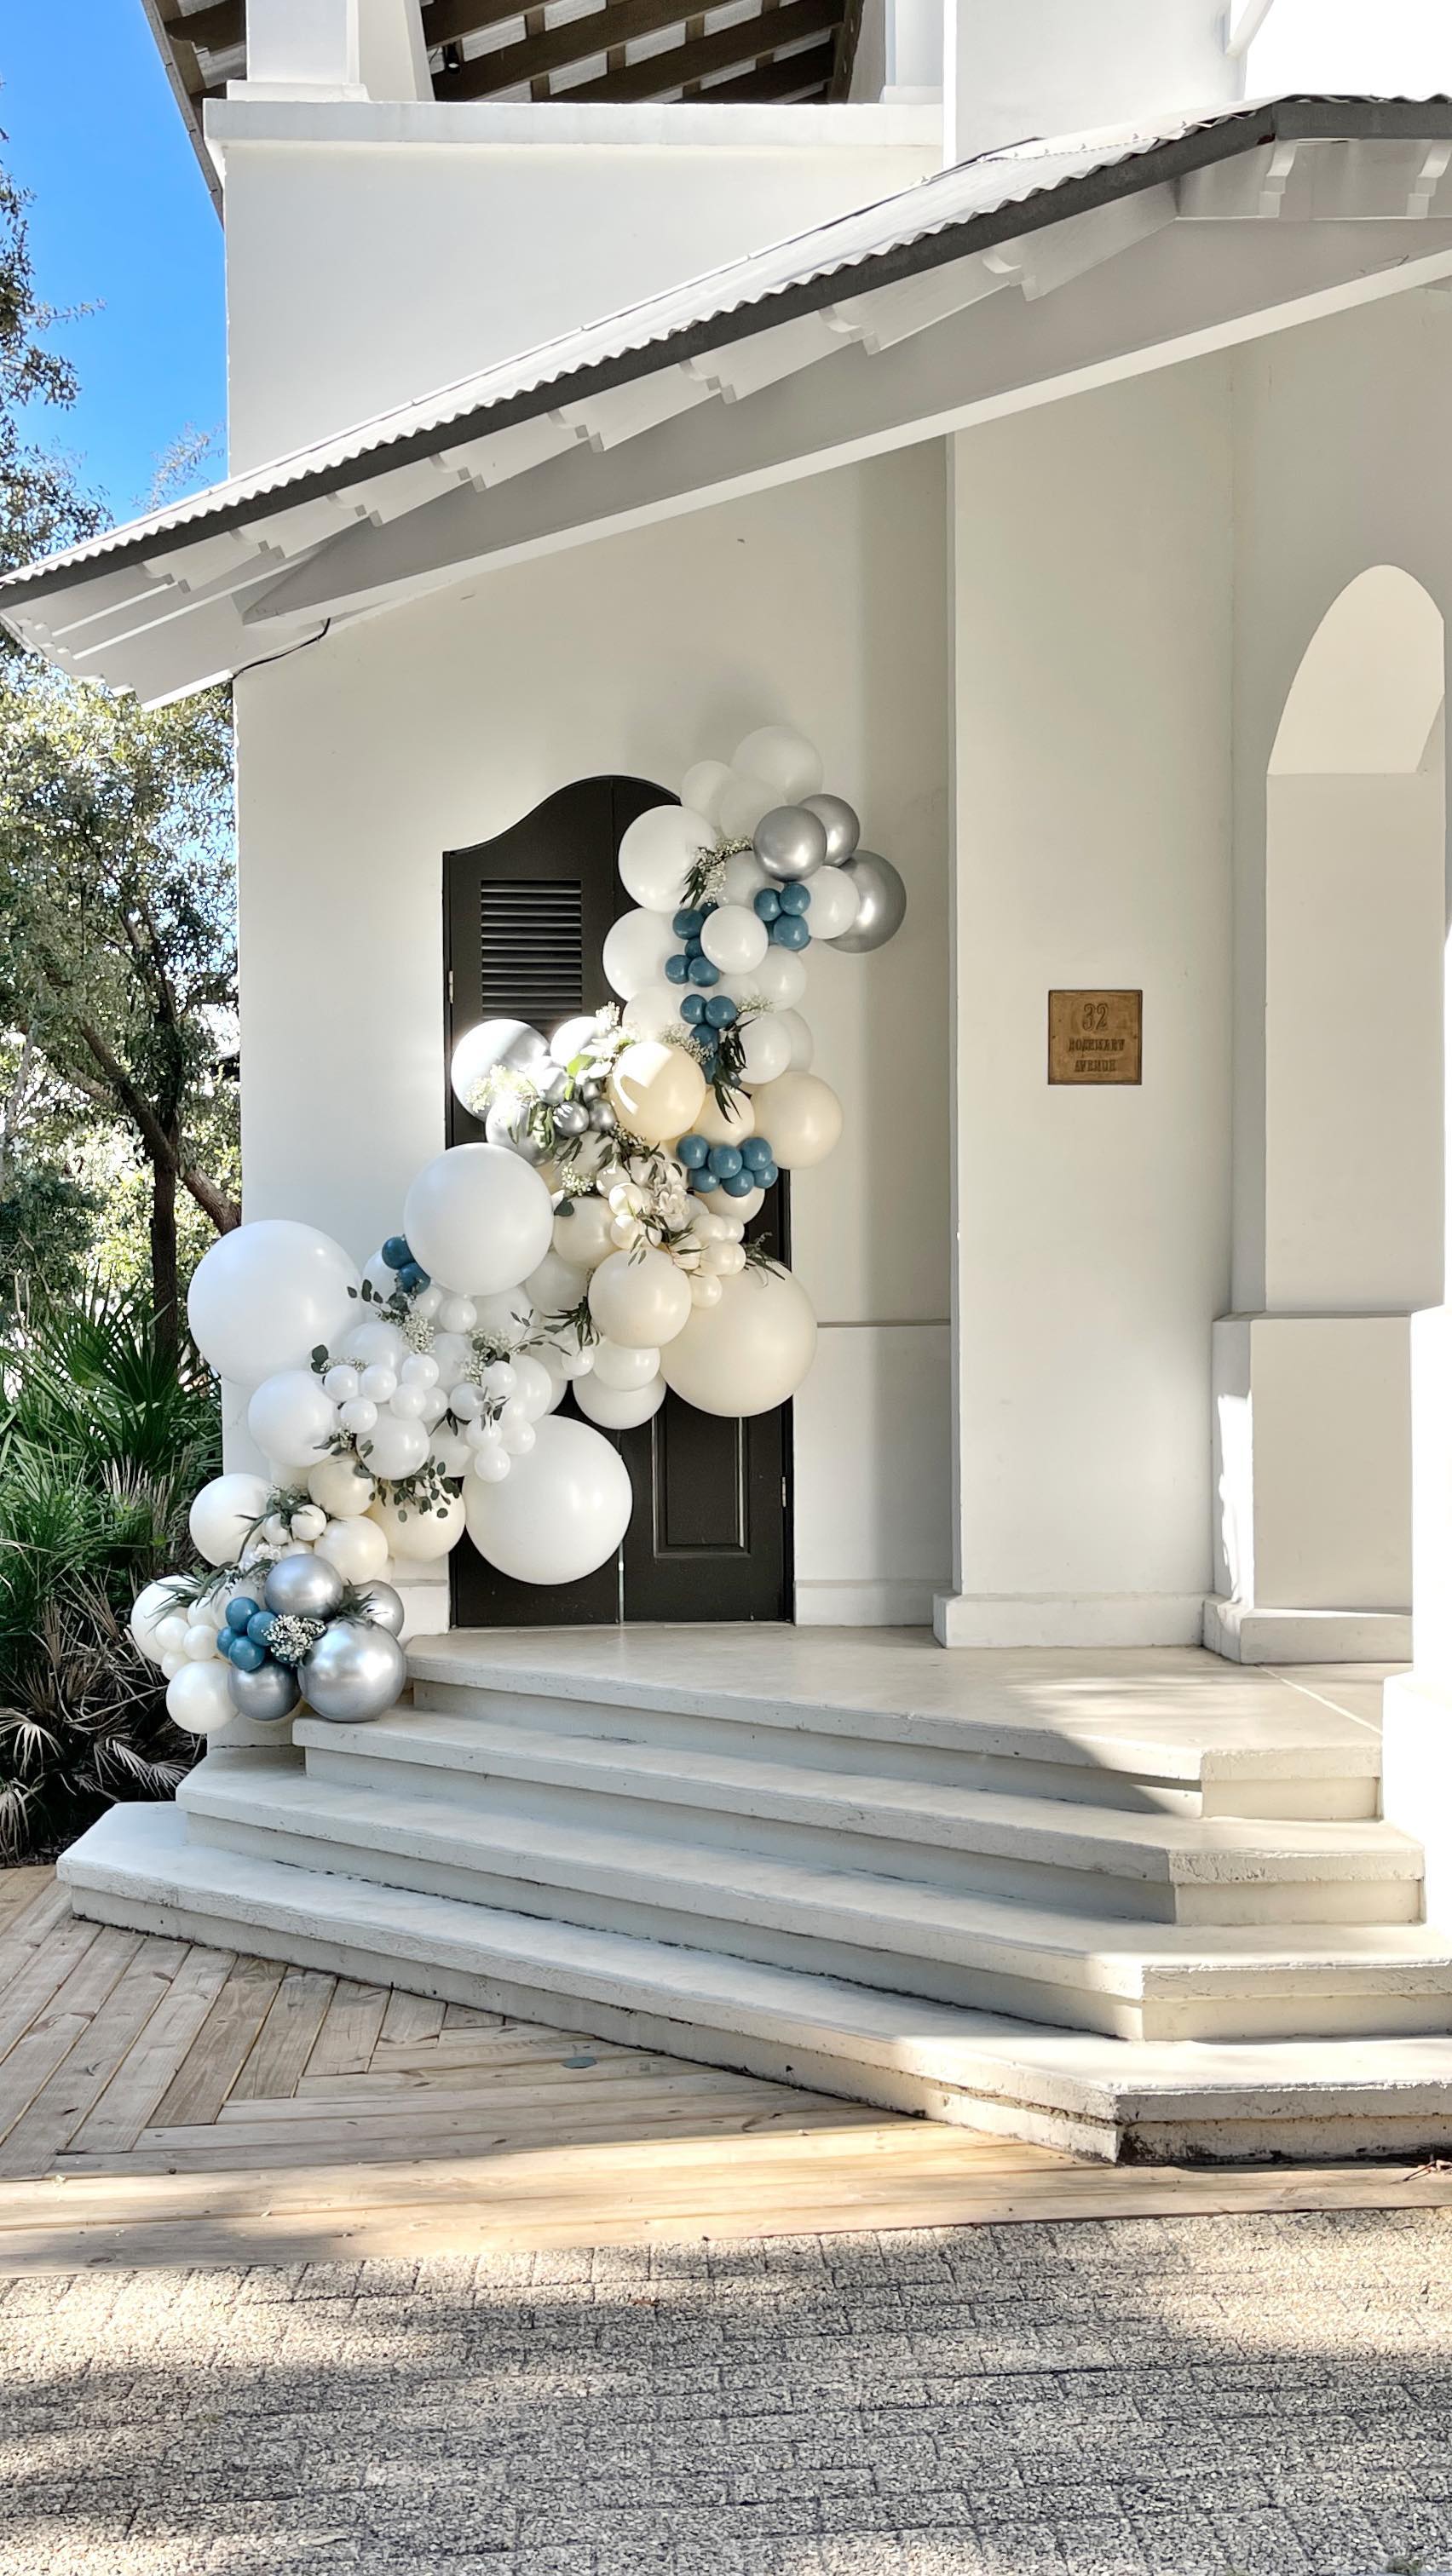 Our specialty: B A L L O O N S

Including the way we glam up a bridal house when wedding weekend arrives. 

#weddingreels #weddingballoons #balloonreel #balloongarland #organicballoons #balloonstylist #balloonboutique #balloons #rosemarybeachwedding #30awedding